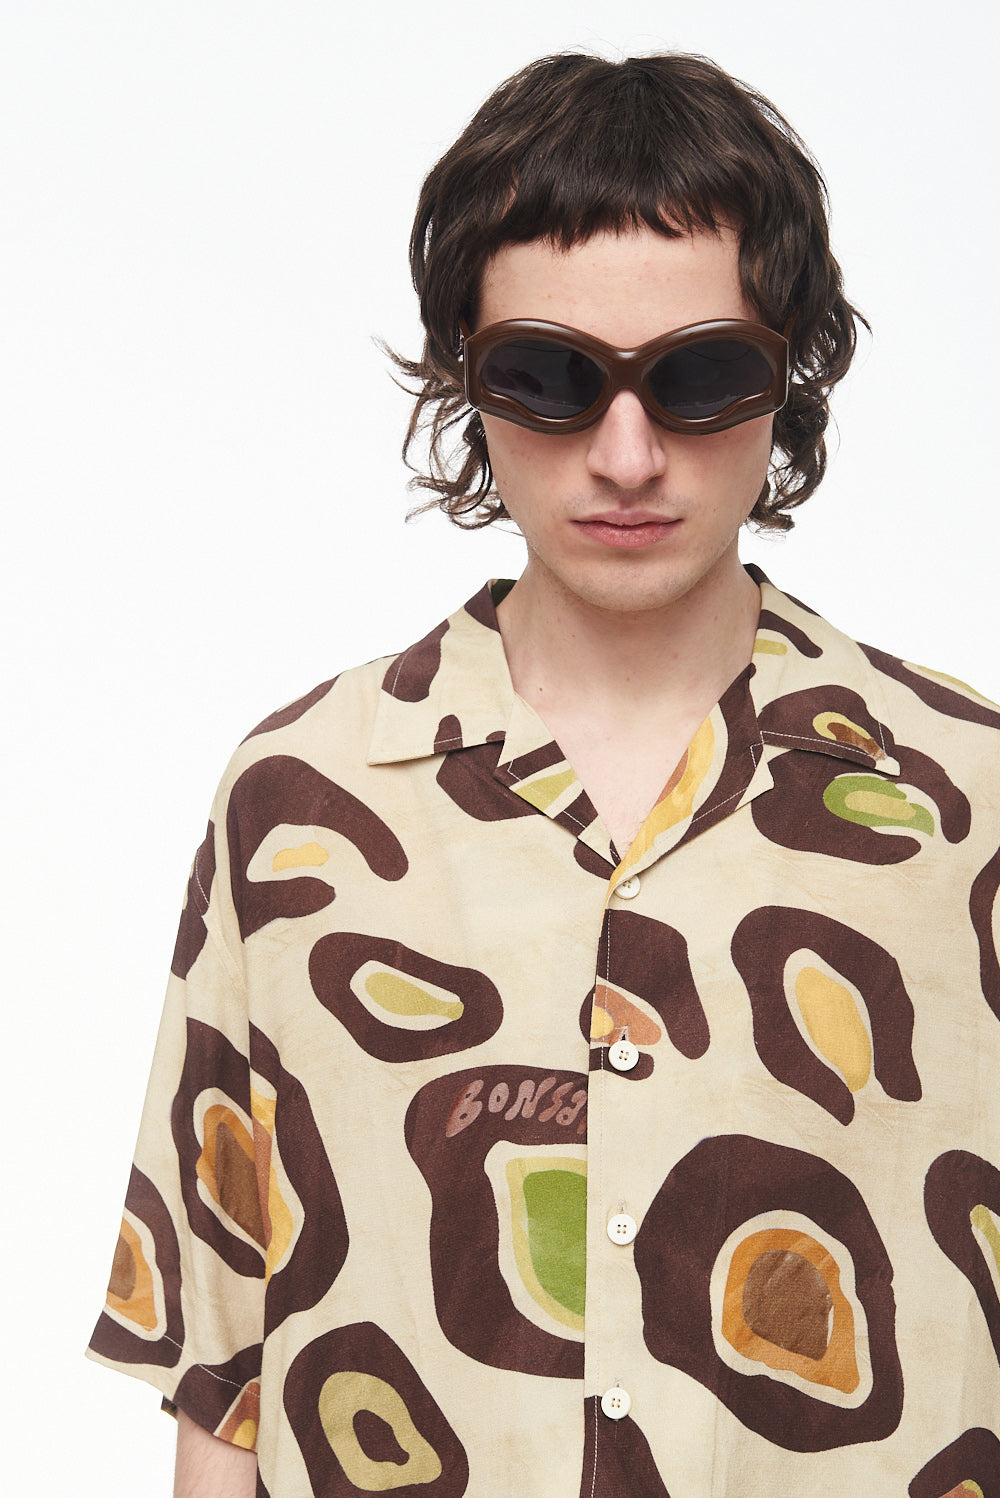 COCCINELLE BOWLING SHIRT